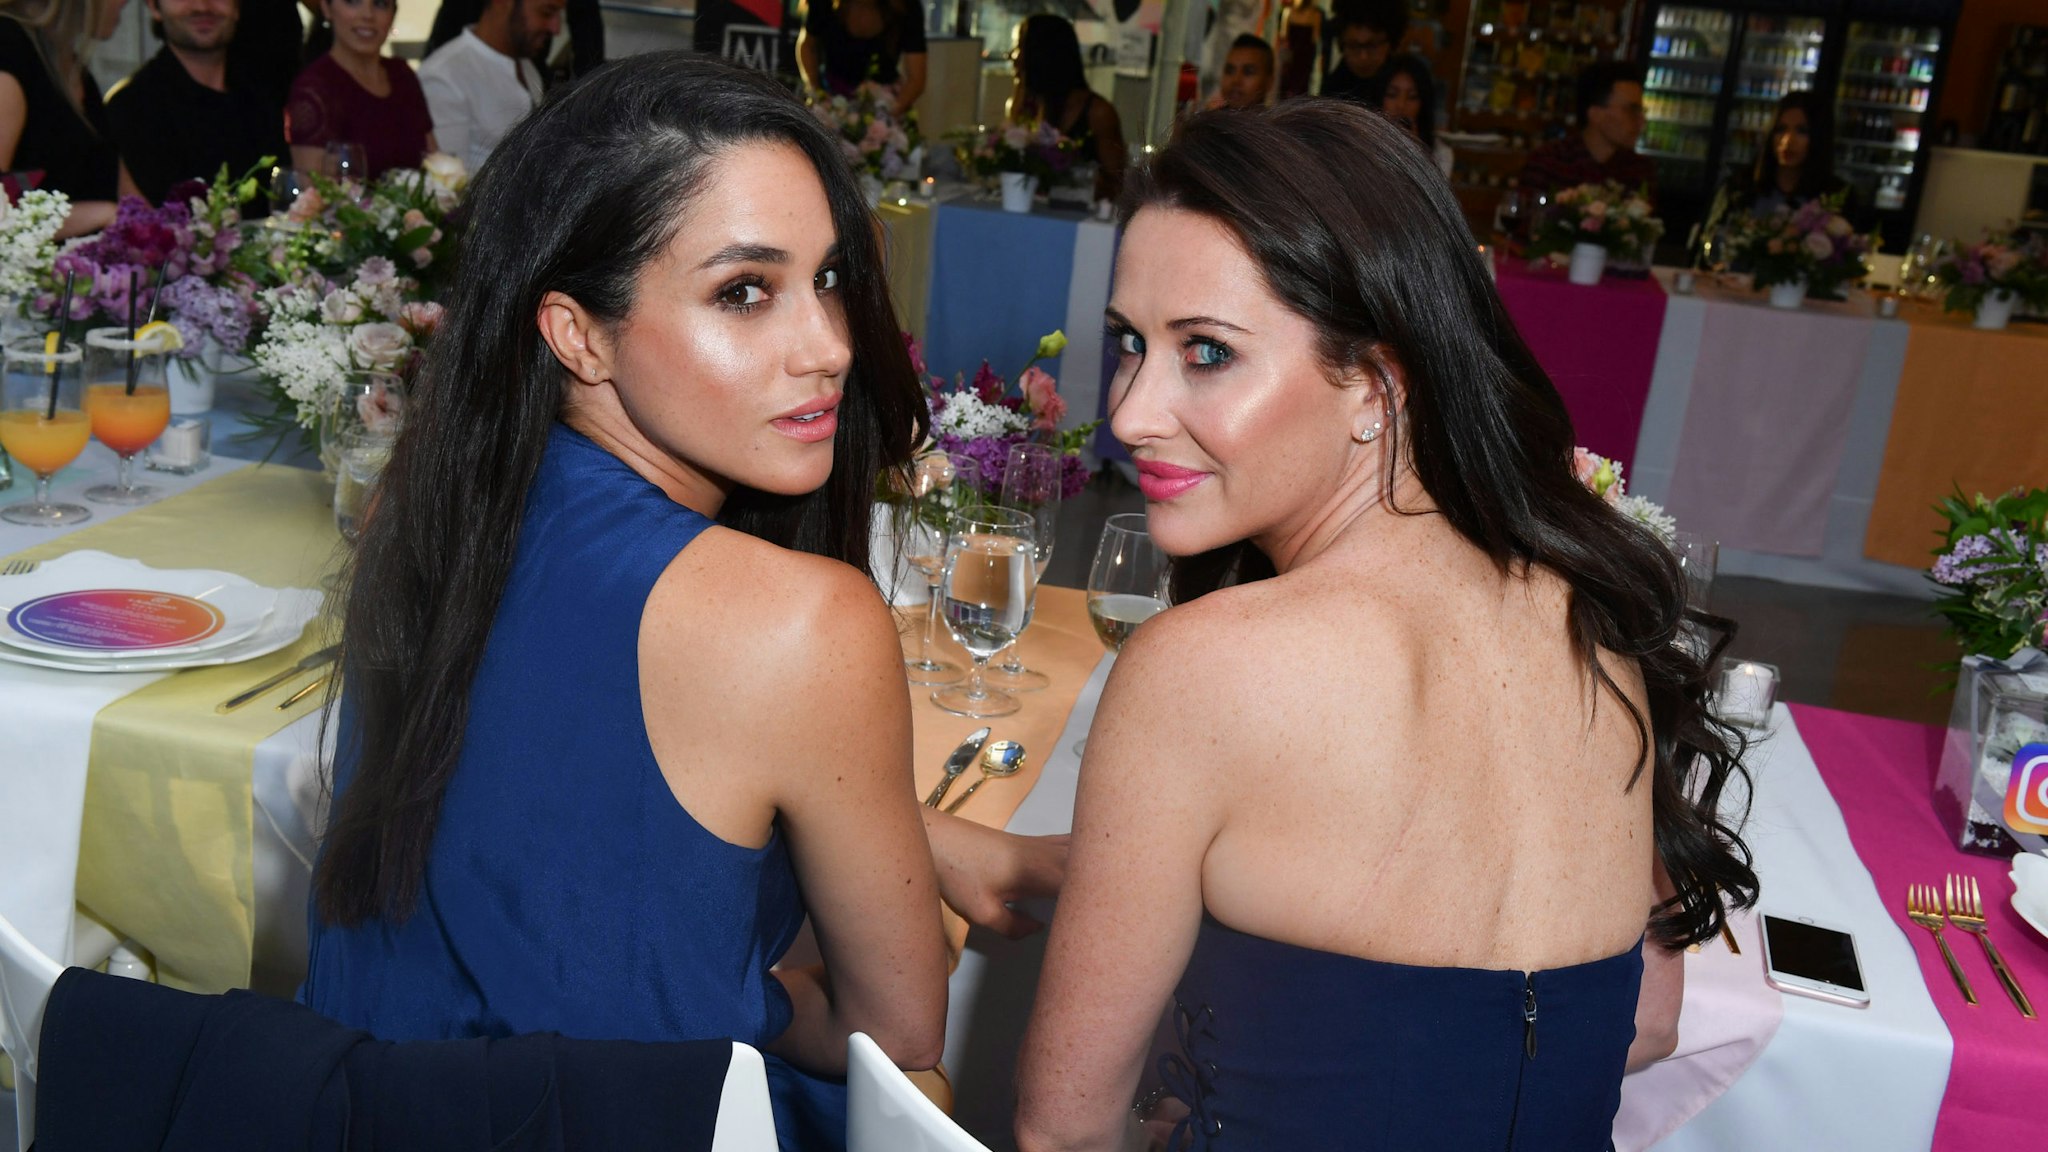 TORONTO, ON - MAY 31: Actress Meghan Markle and Jessica Mulroney attend the Instagram Dinner held at the MARS Discovery District on May 31, 2016 in Toronto, Canada. (Photo by George Pimentel/WireImage)